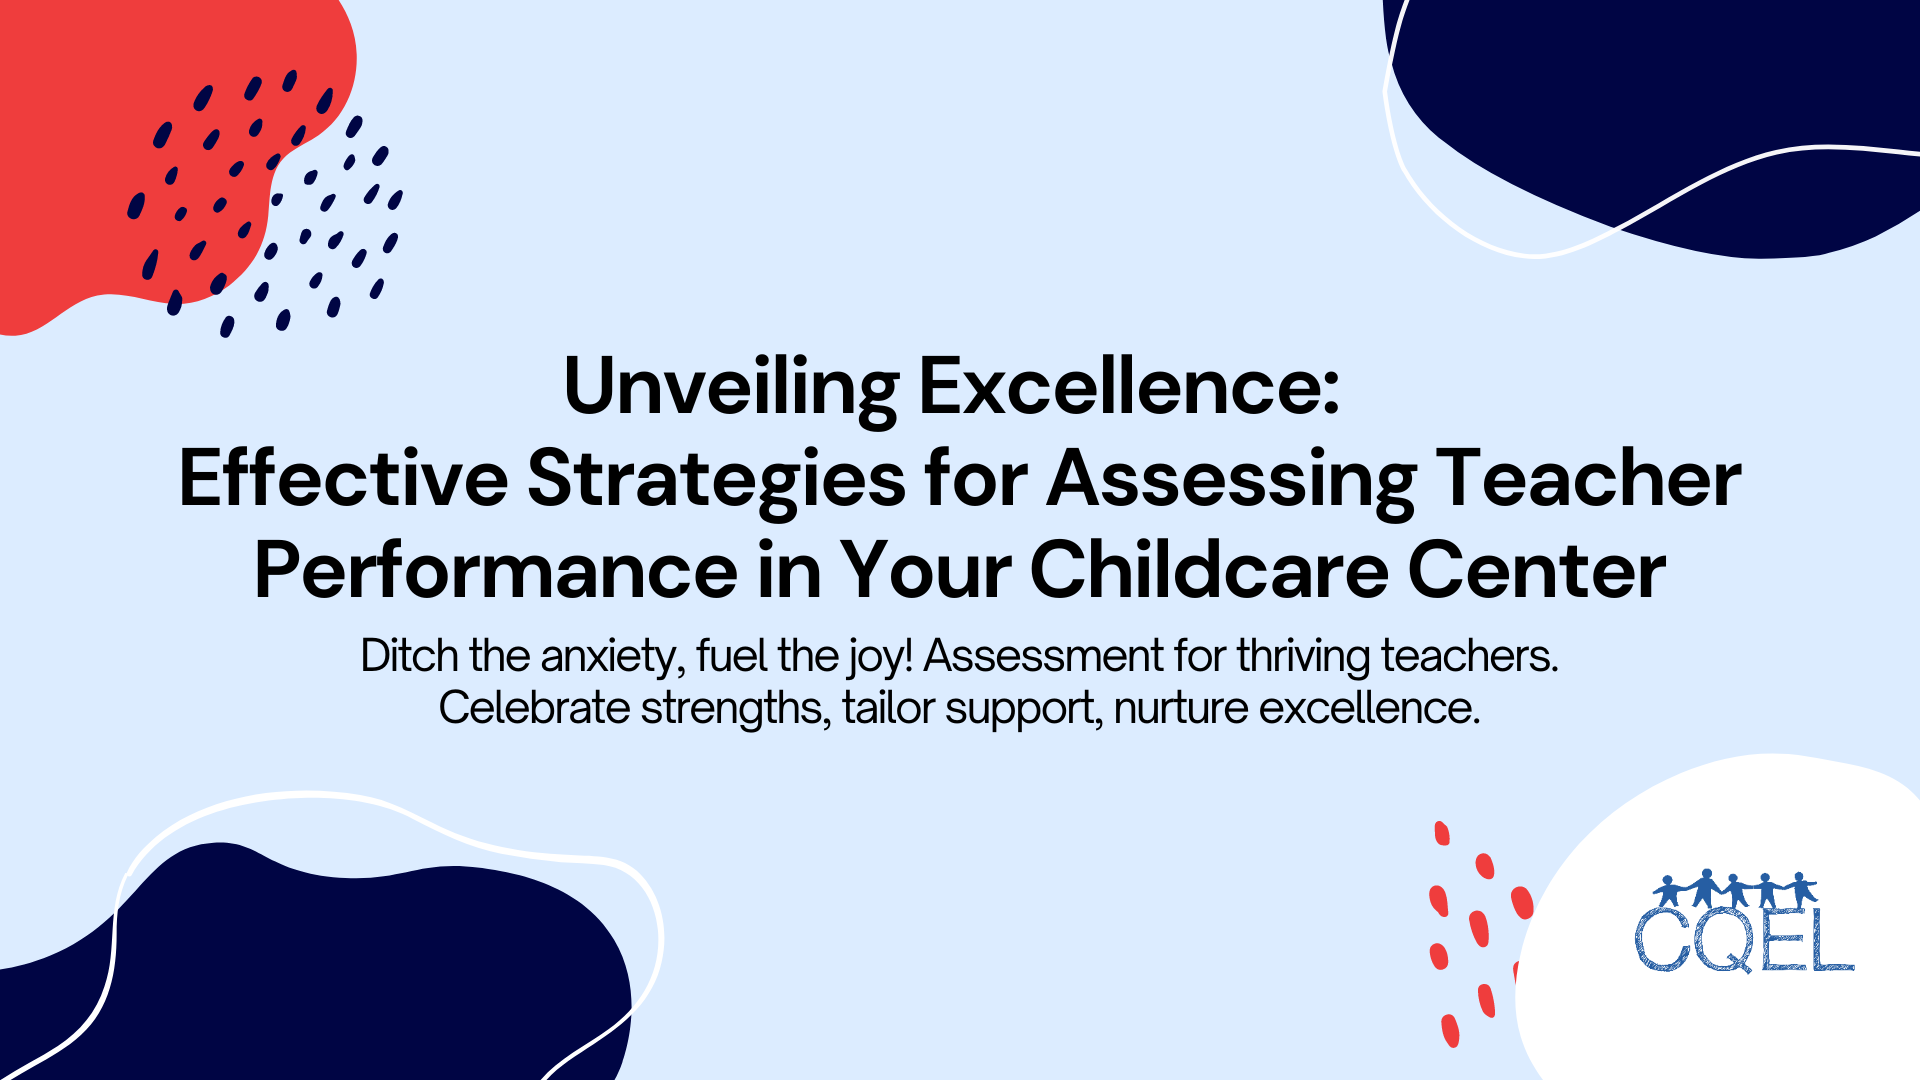 Unveiling Excellence: Effective Strategies for Assessing Teacher Performance in Your Childcare Center